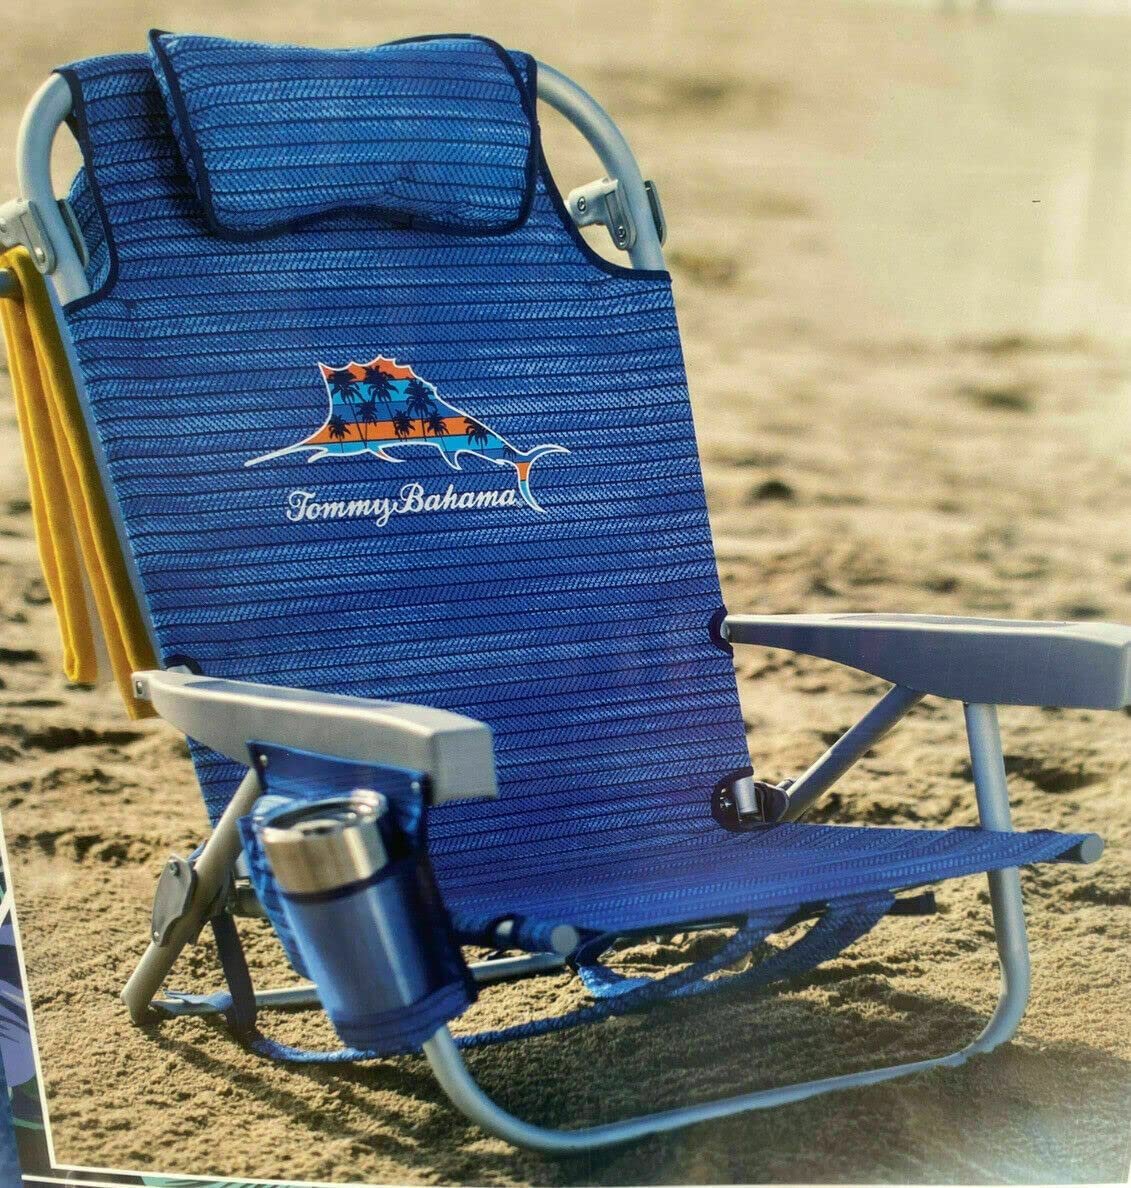 Tommy Bahama Backpack Beach Chair-New 2022 Designs-5-Position Classic Lay Flat-Insulated Cooler Towel Bar-Storage Pouch Sailfish and Palms - image 1 of 6